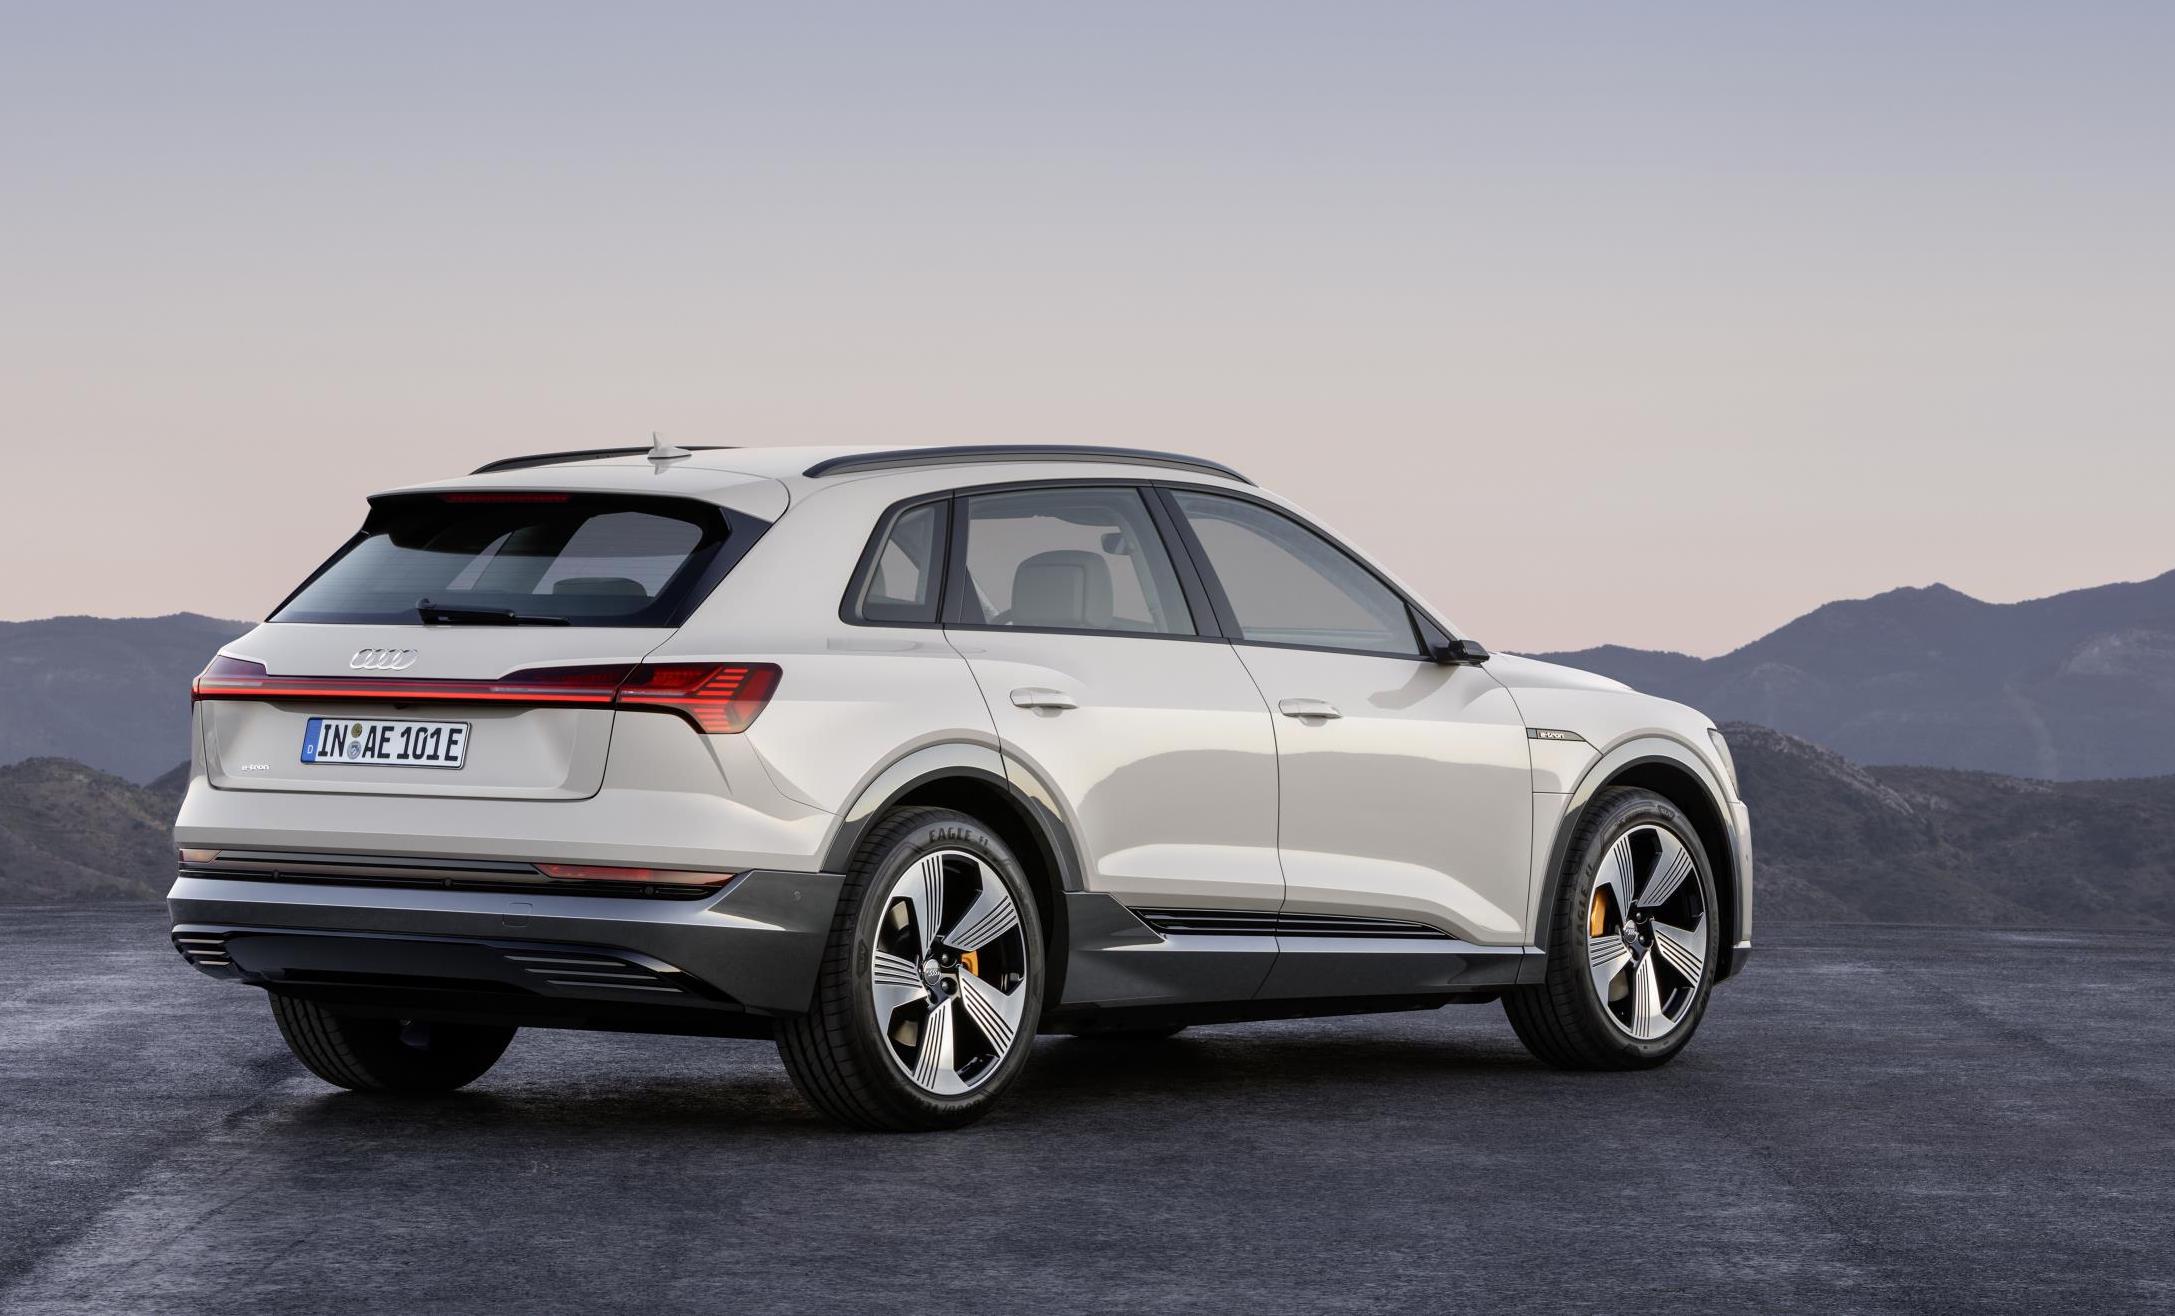 Audi etron fully electric SUV unveiled PerformanceDrive